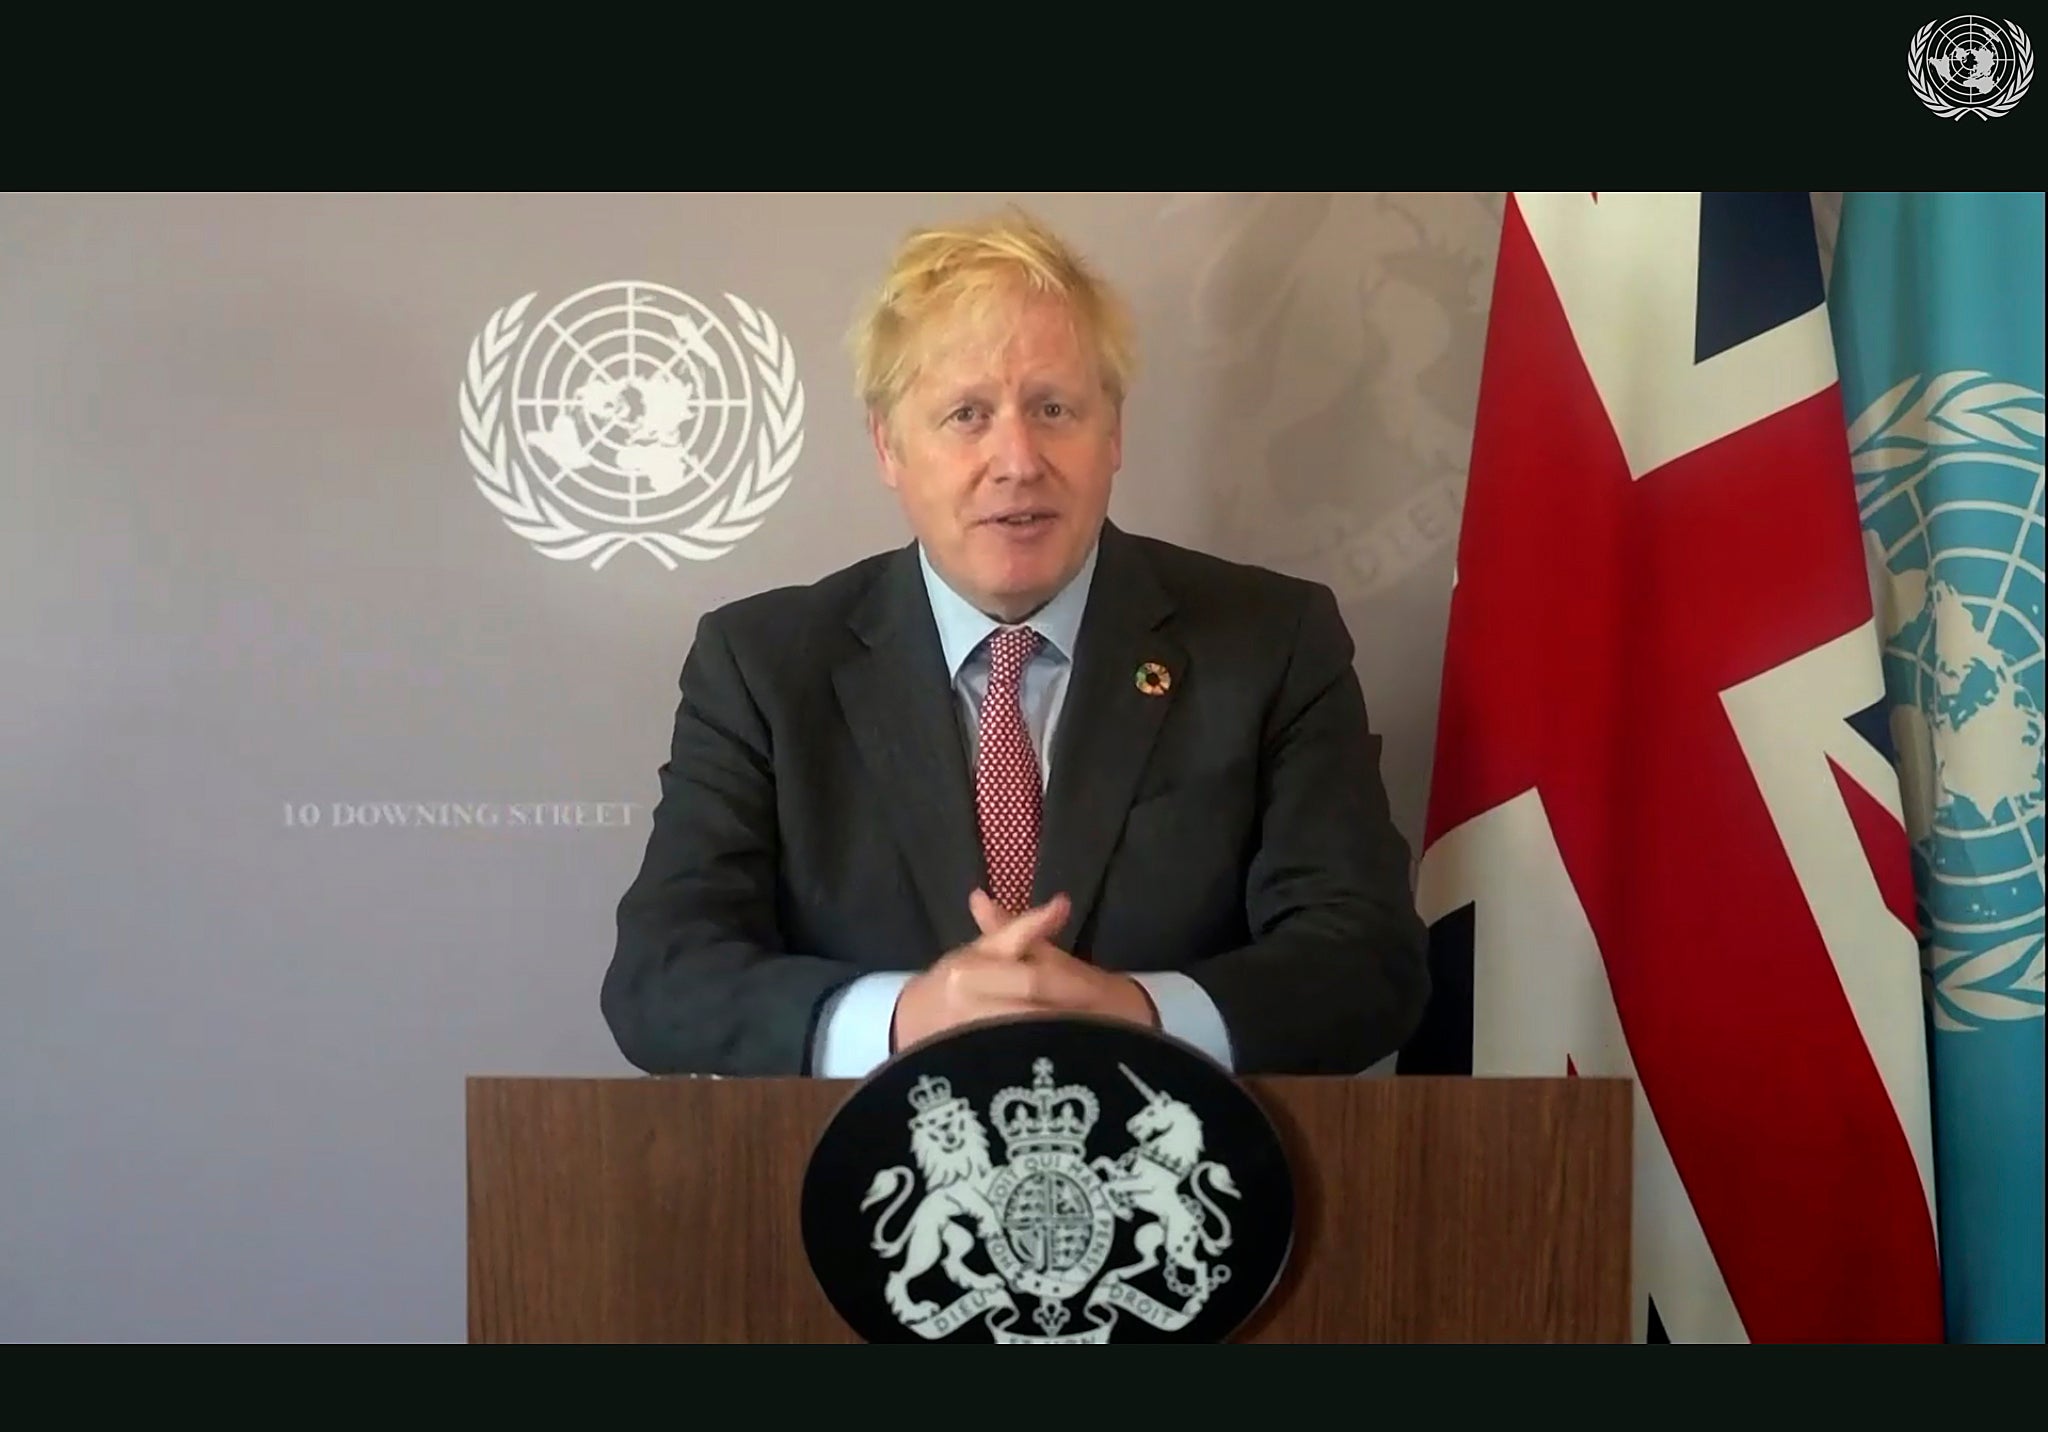 Johnson addresses the UN General Assembly remotely on Saturday